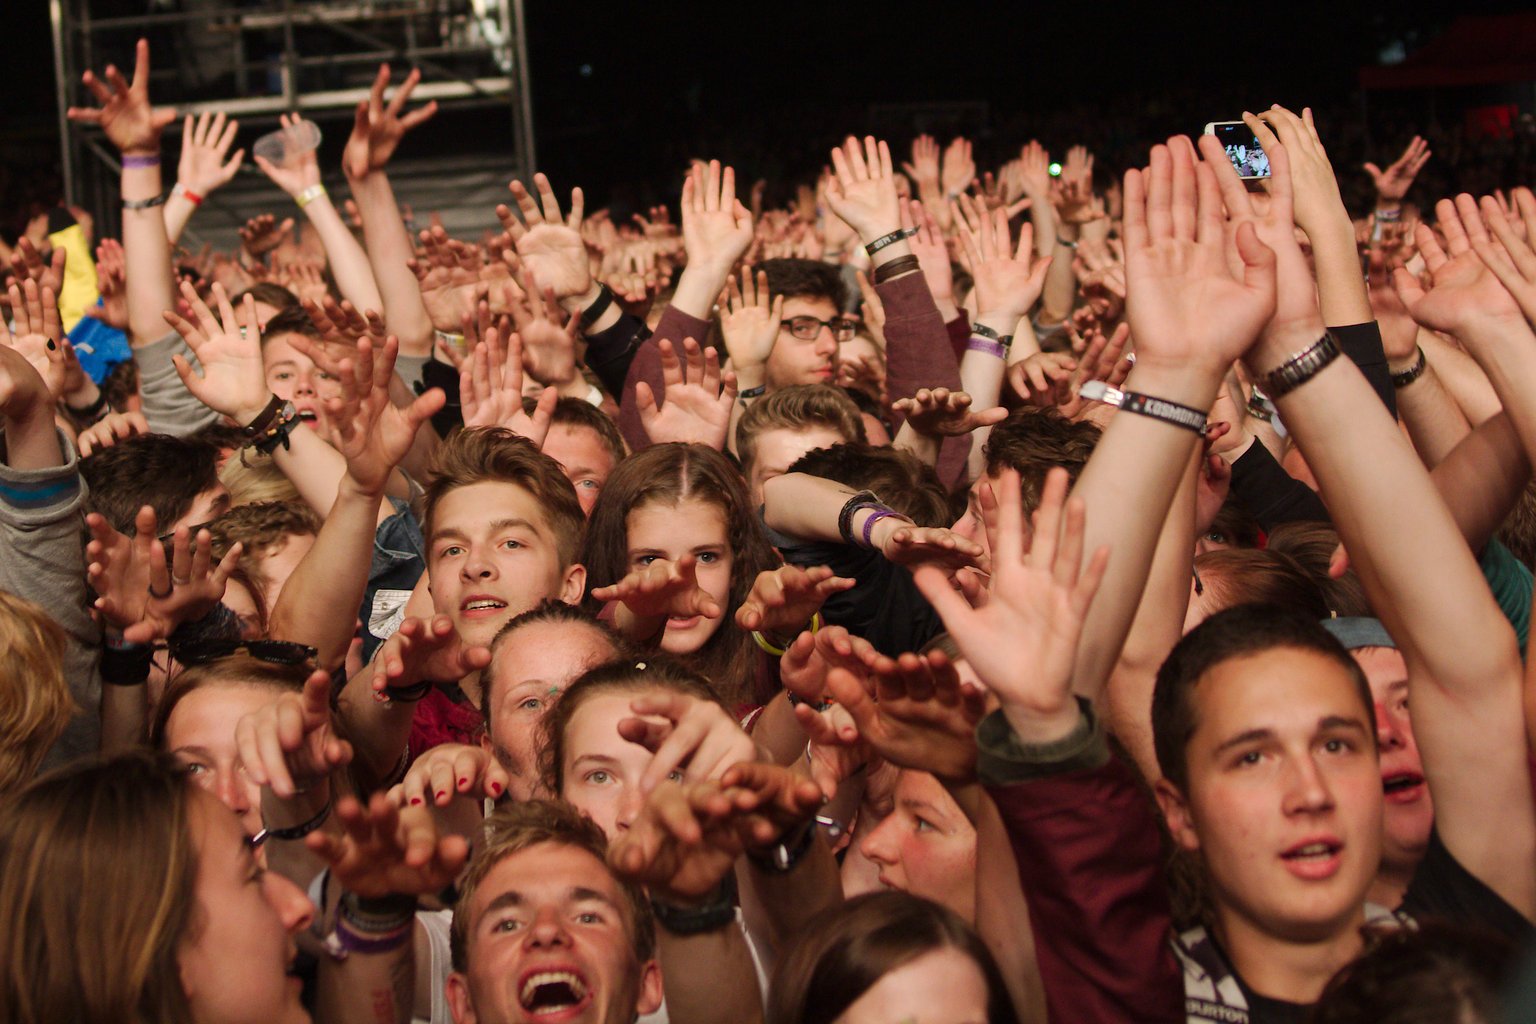 Crowd with raised hands reaching and facing towards the photographer